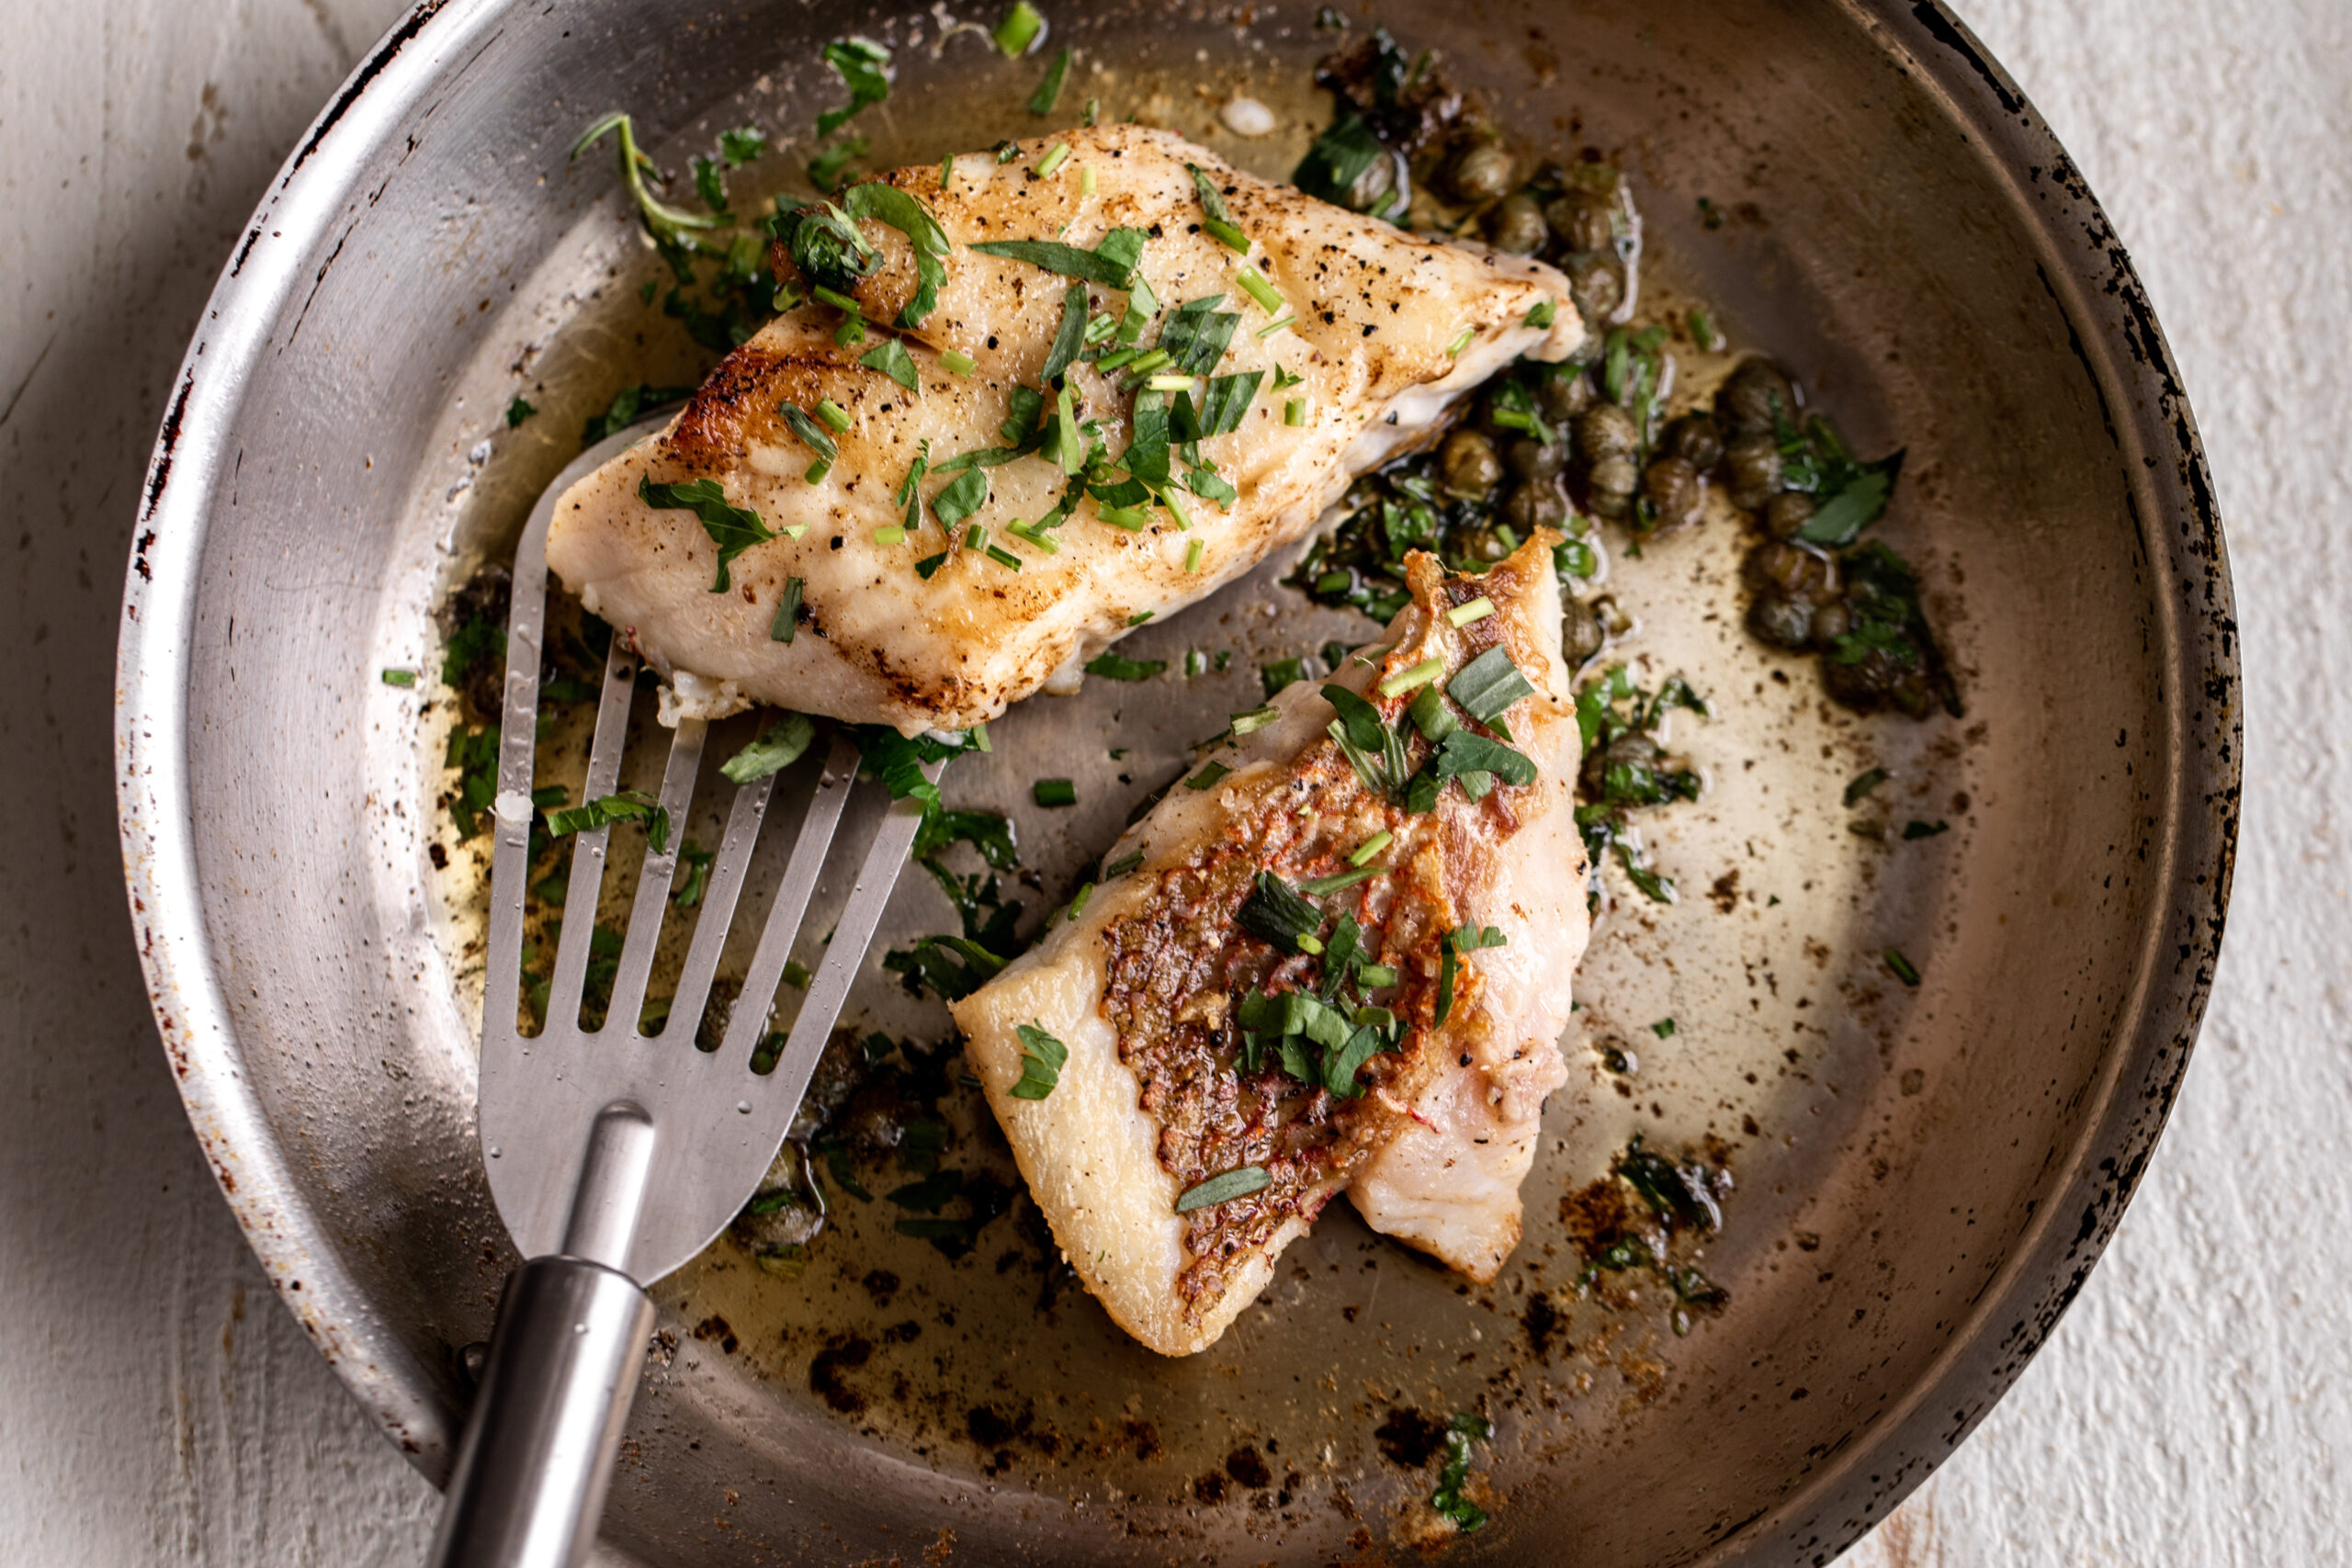 https://cookingwithcocktailrings.com/wp-content/uploads/2022/01/Pan-seared-white-fish-17-scaled.jpg